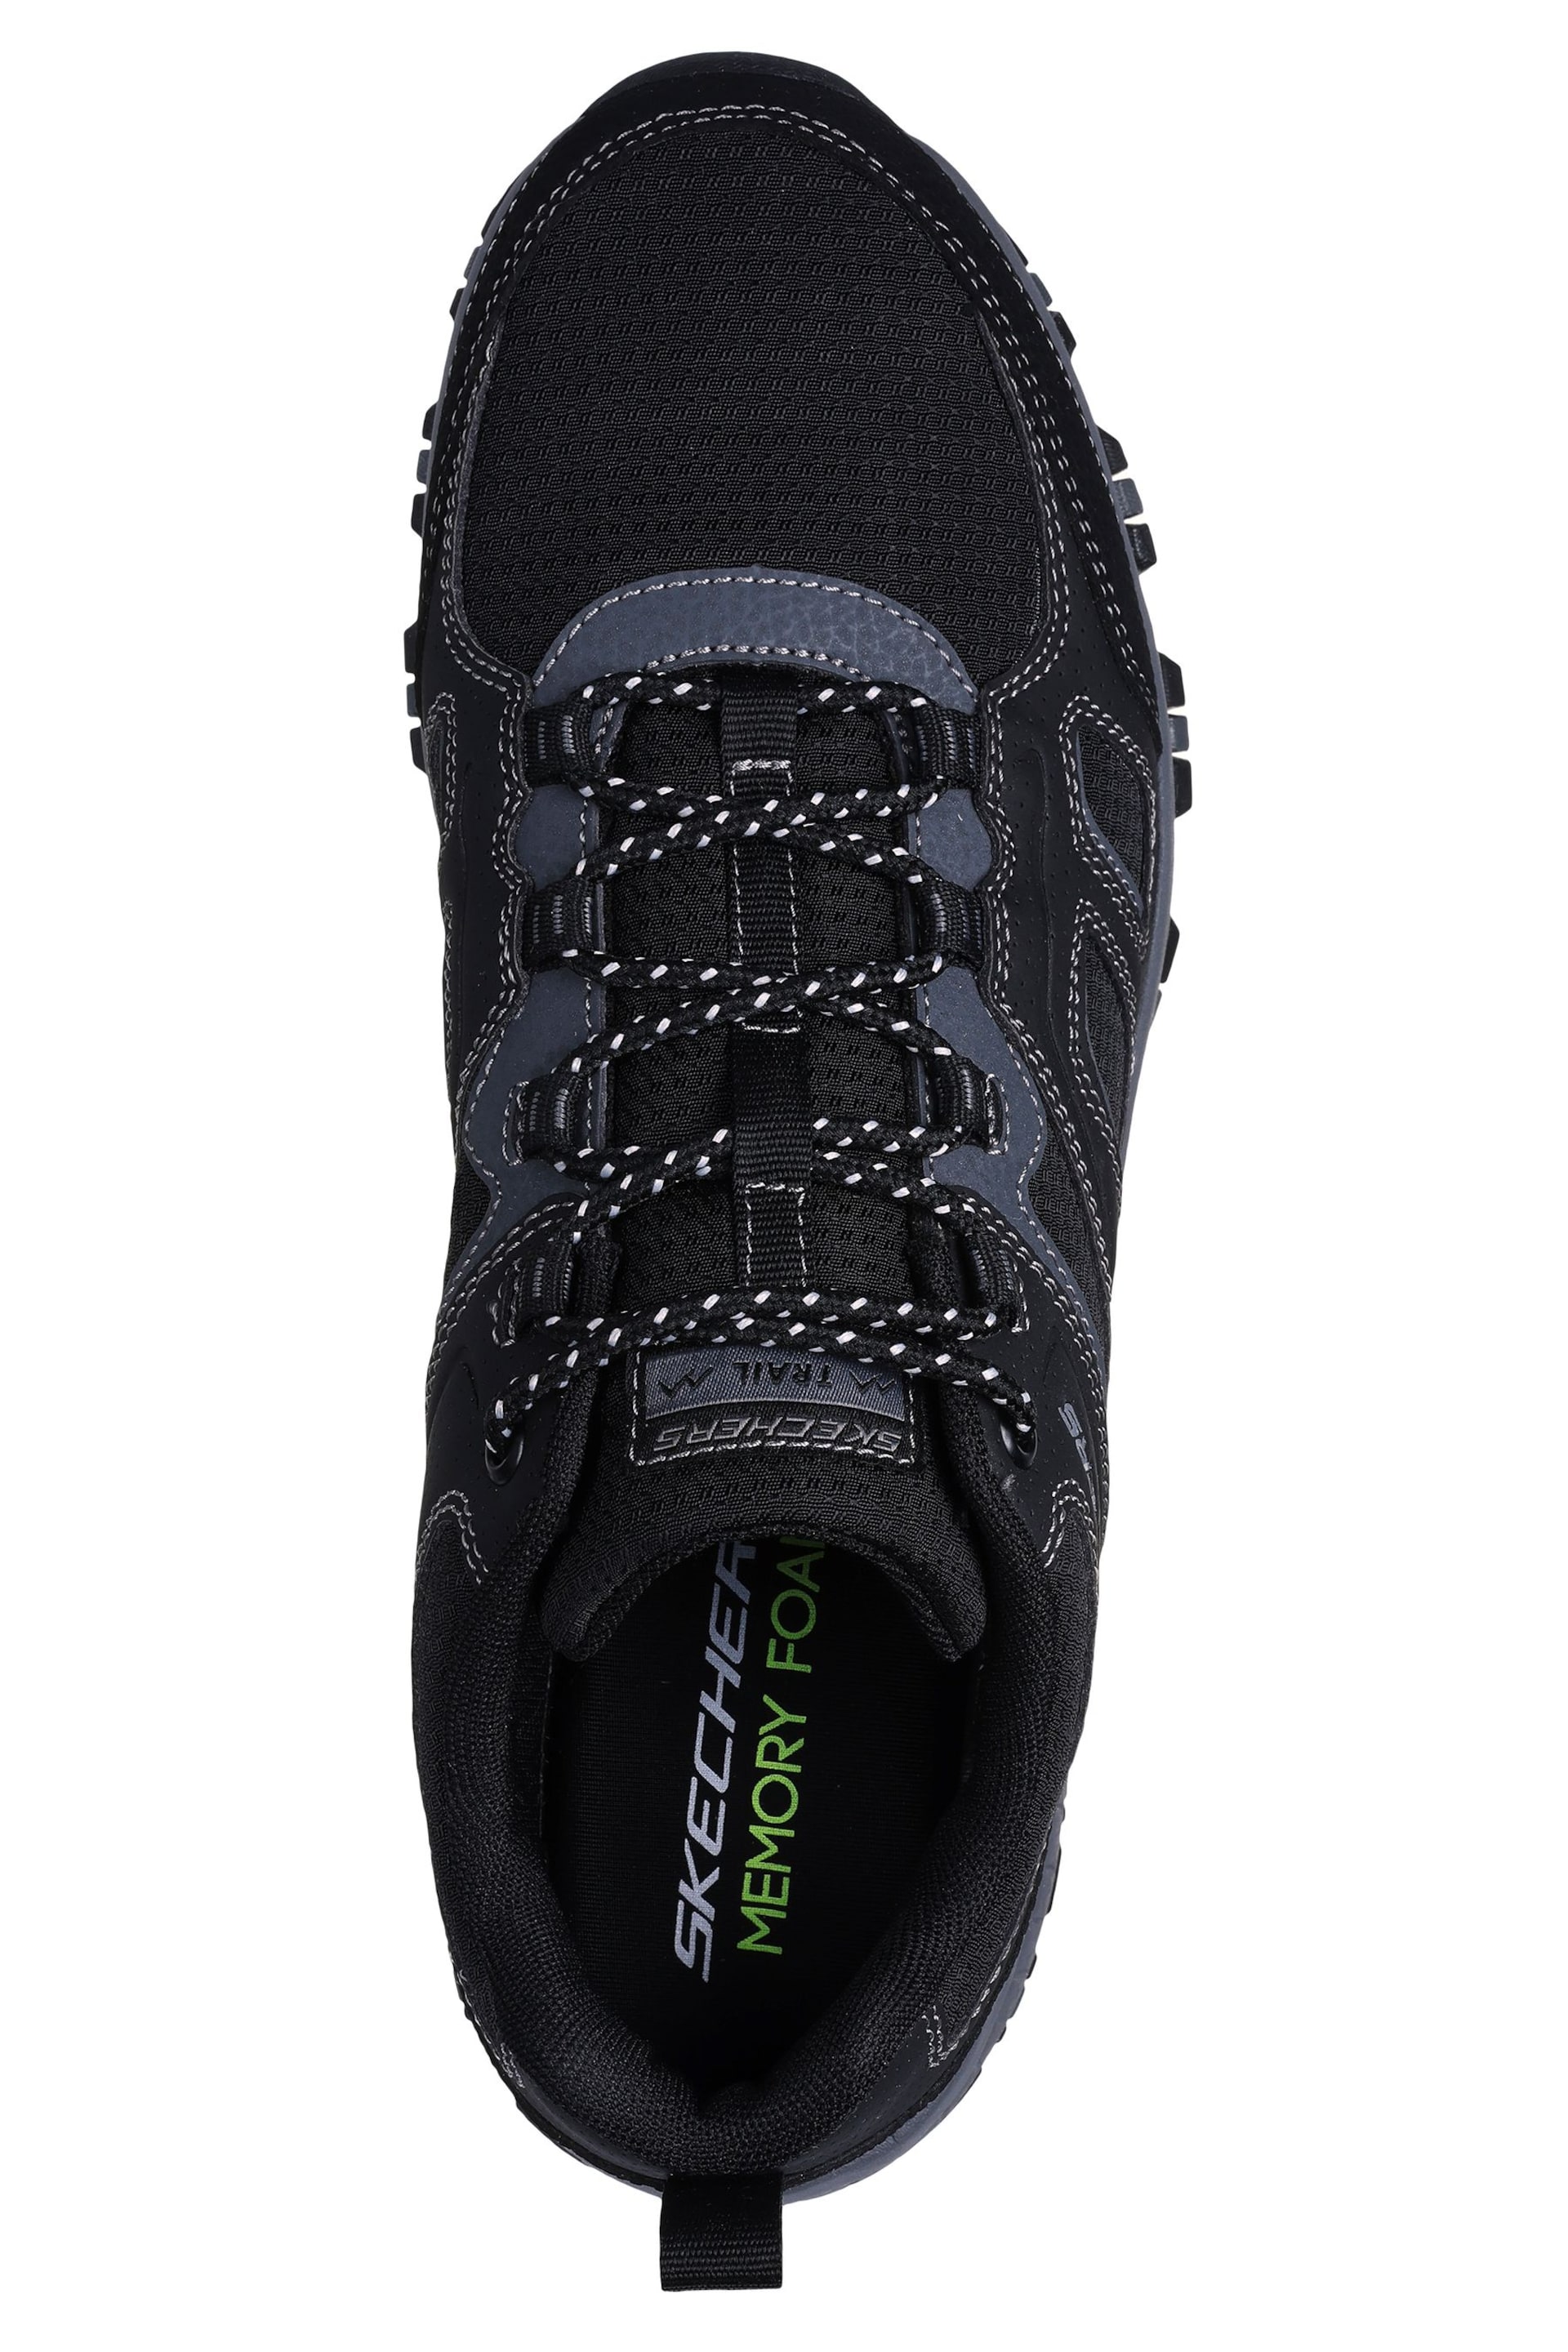 Skechers Black Mens Hillcrest Pure Escape Trail Running Trainers - Image 4 of 5